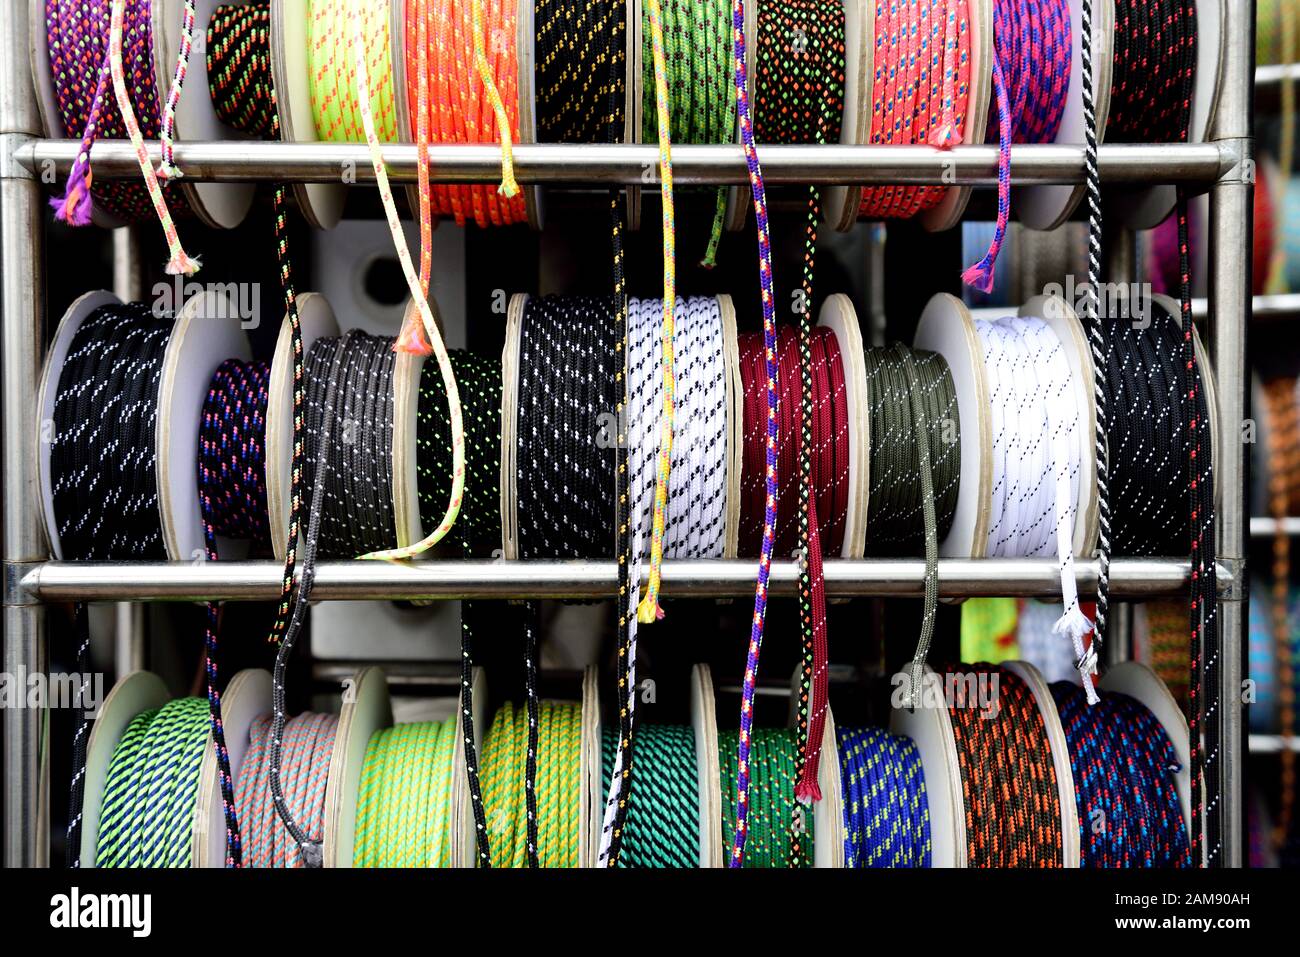 Rows of bright multi-colored rope and cord, Seoul, South Korea Stock Photo